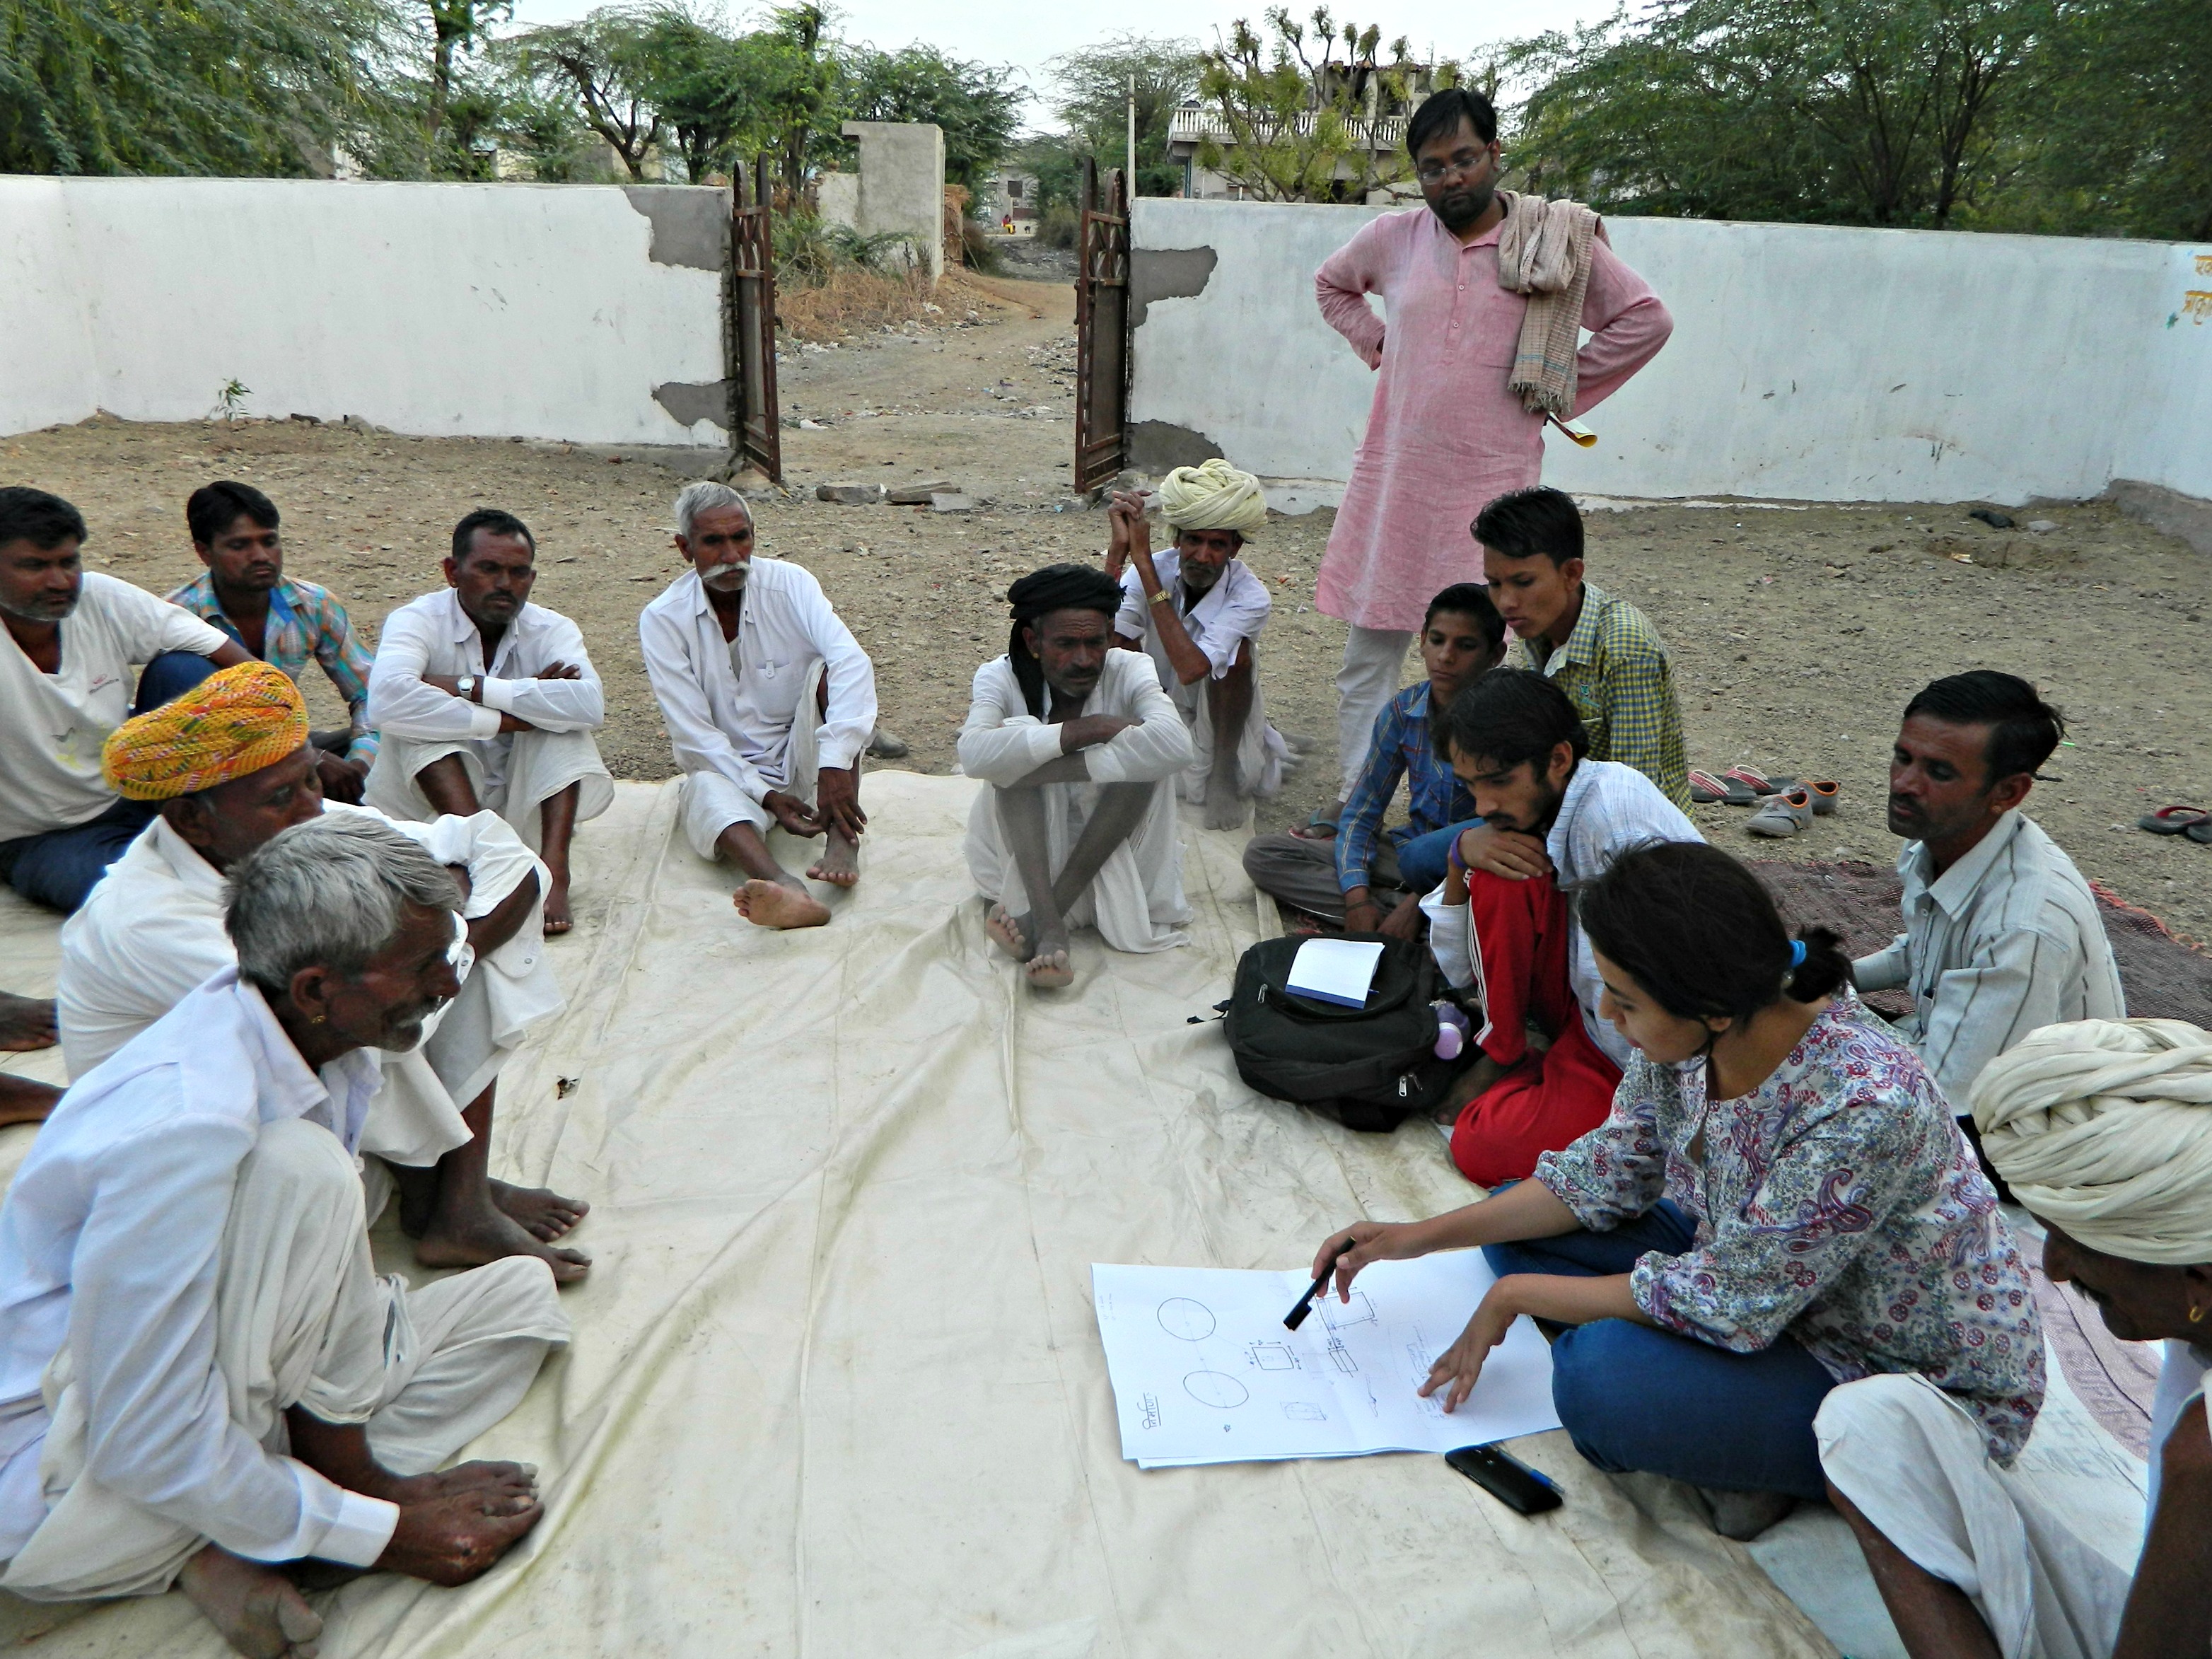 Suriya discussing the toilet with residents of Tiloynia